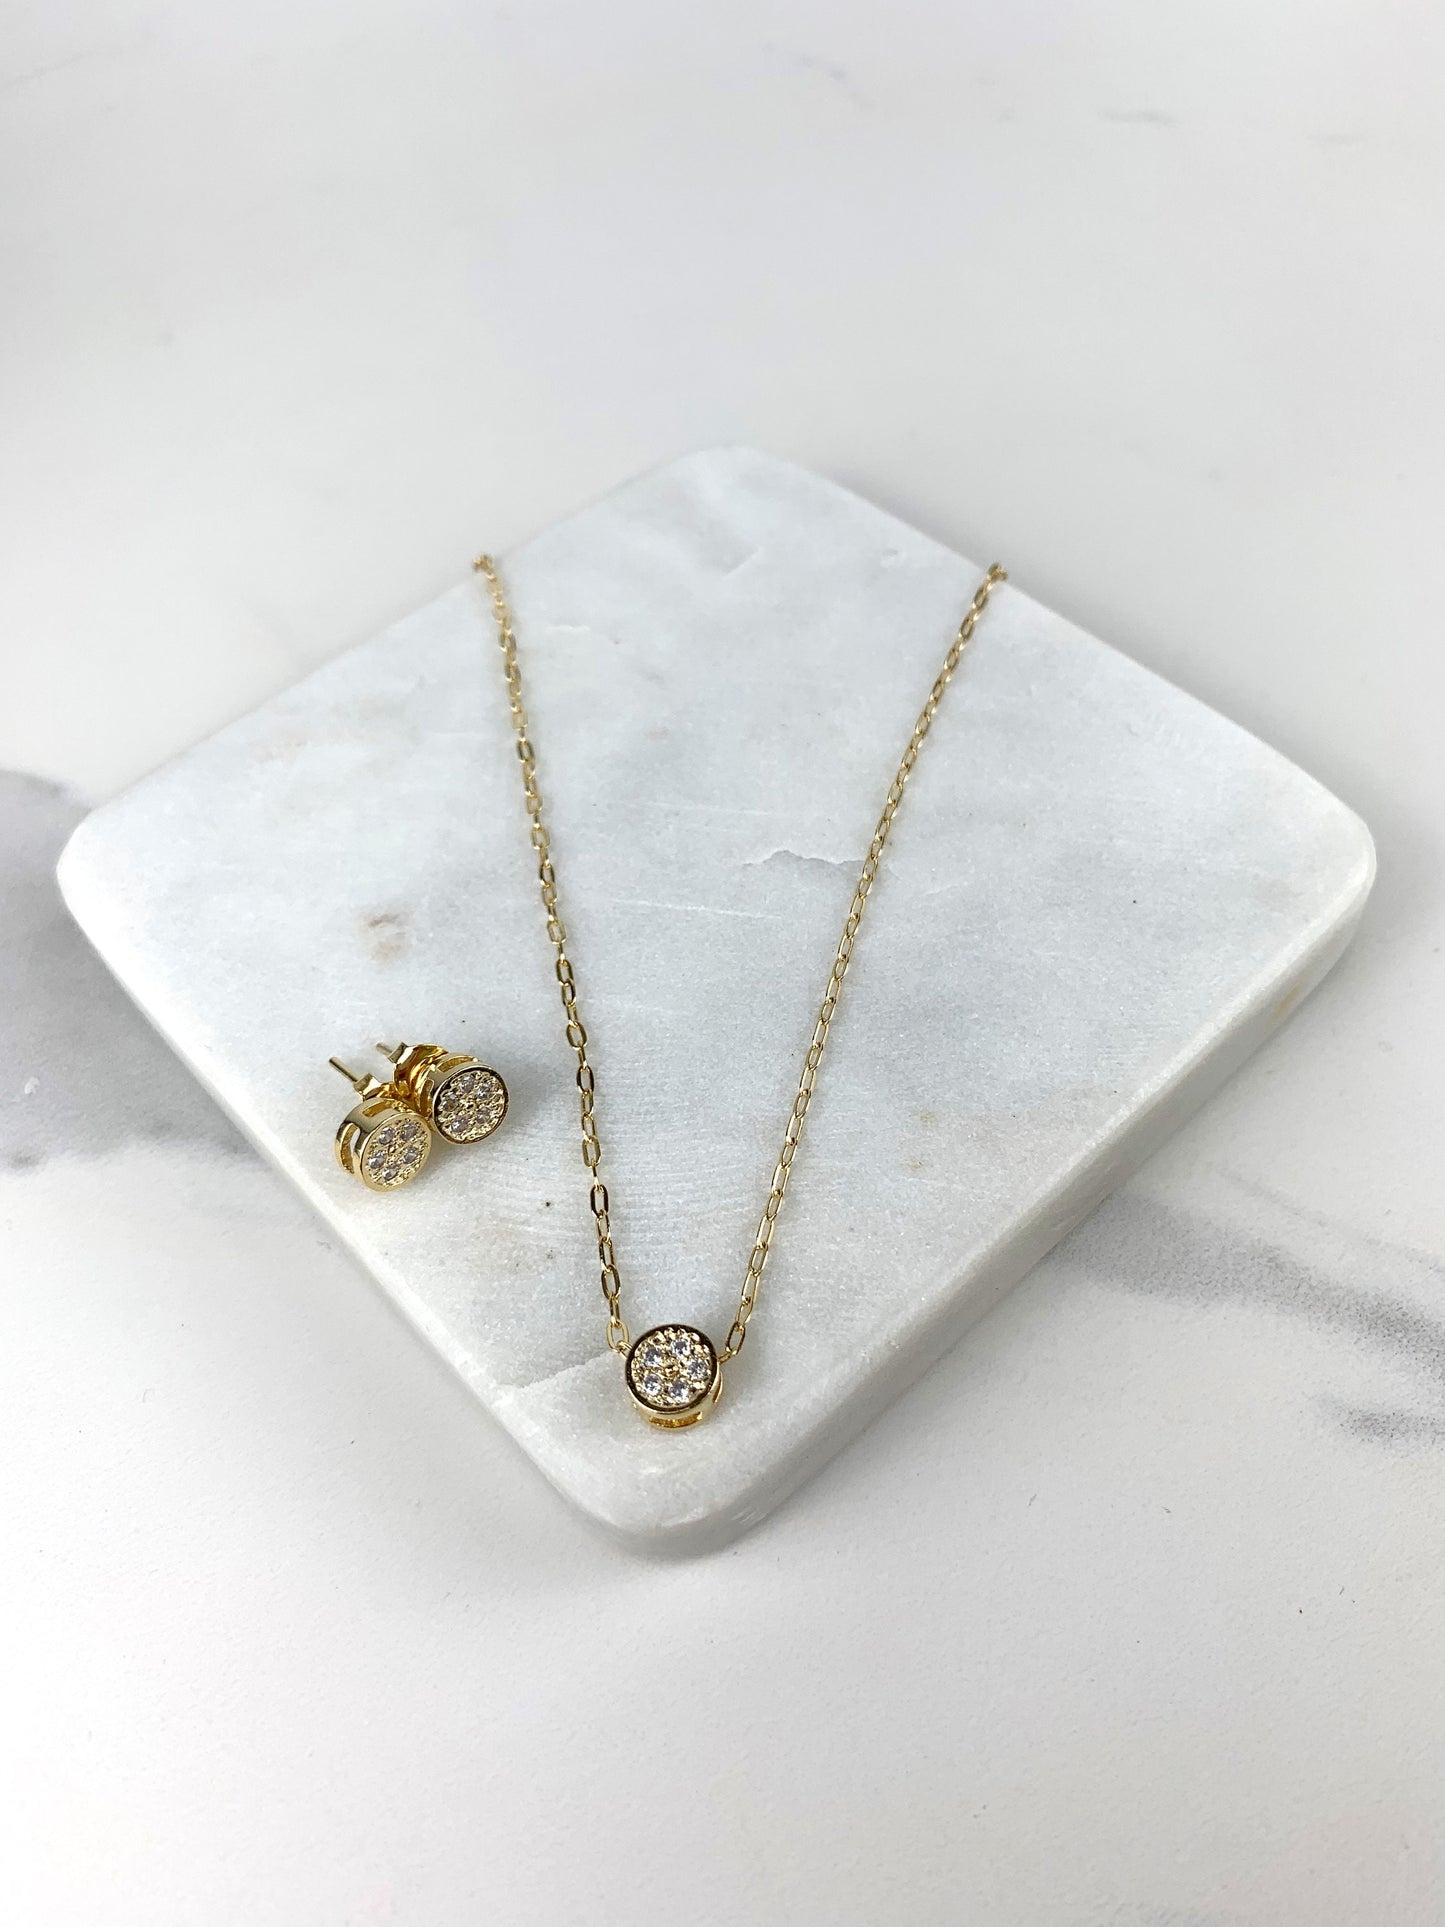 18k Gold Filled Fancy 1mm Cutie circle with CZ Cubic Zirconia Necklace and Earrings Wholesale Jewelry Supplies